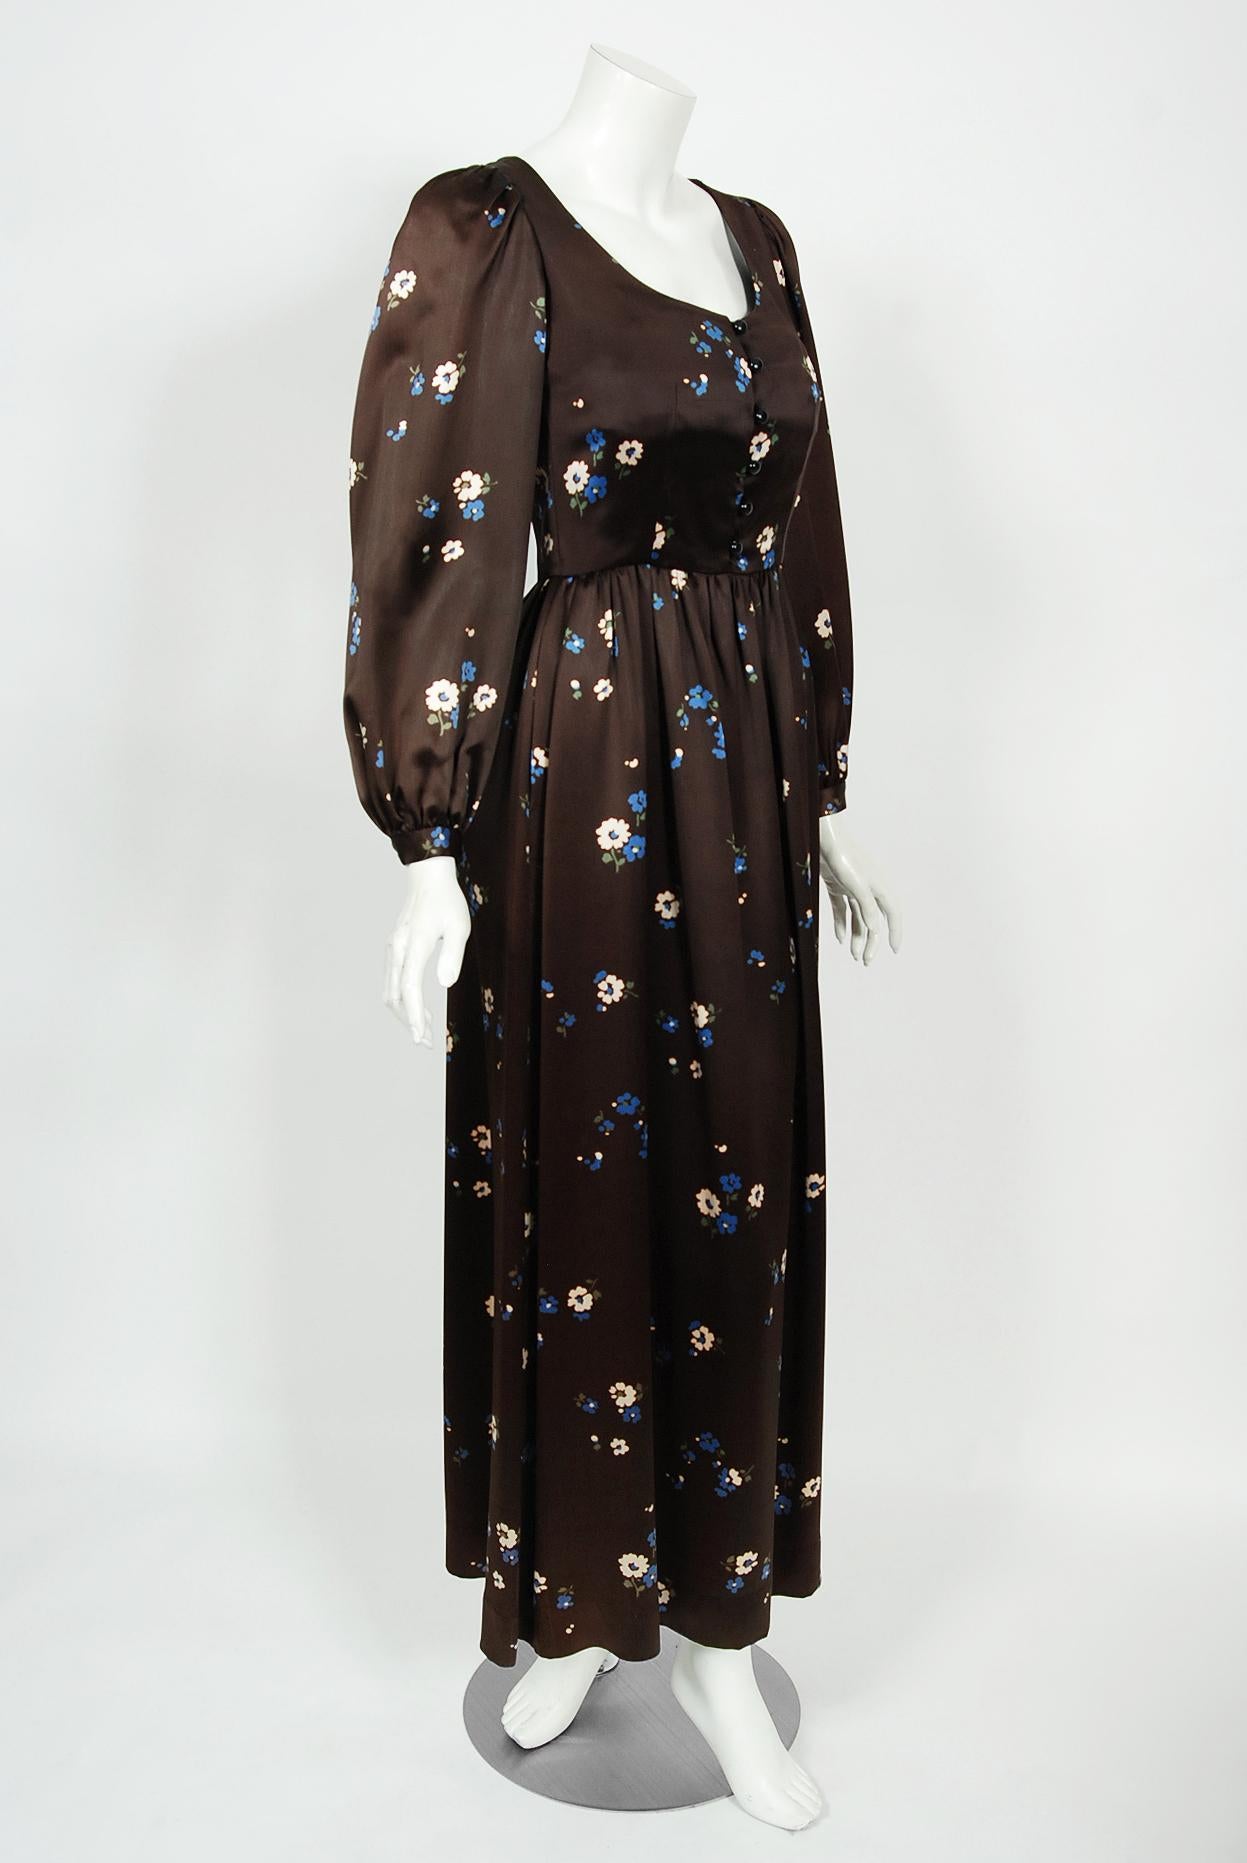 Vintage 1974 Yves Saint Laurent Documented Brown Floral Print Satin Maxi Dress  In Good Condition For Sale In Beverly Hills, CA